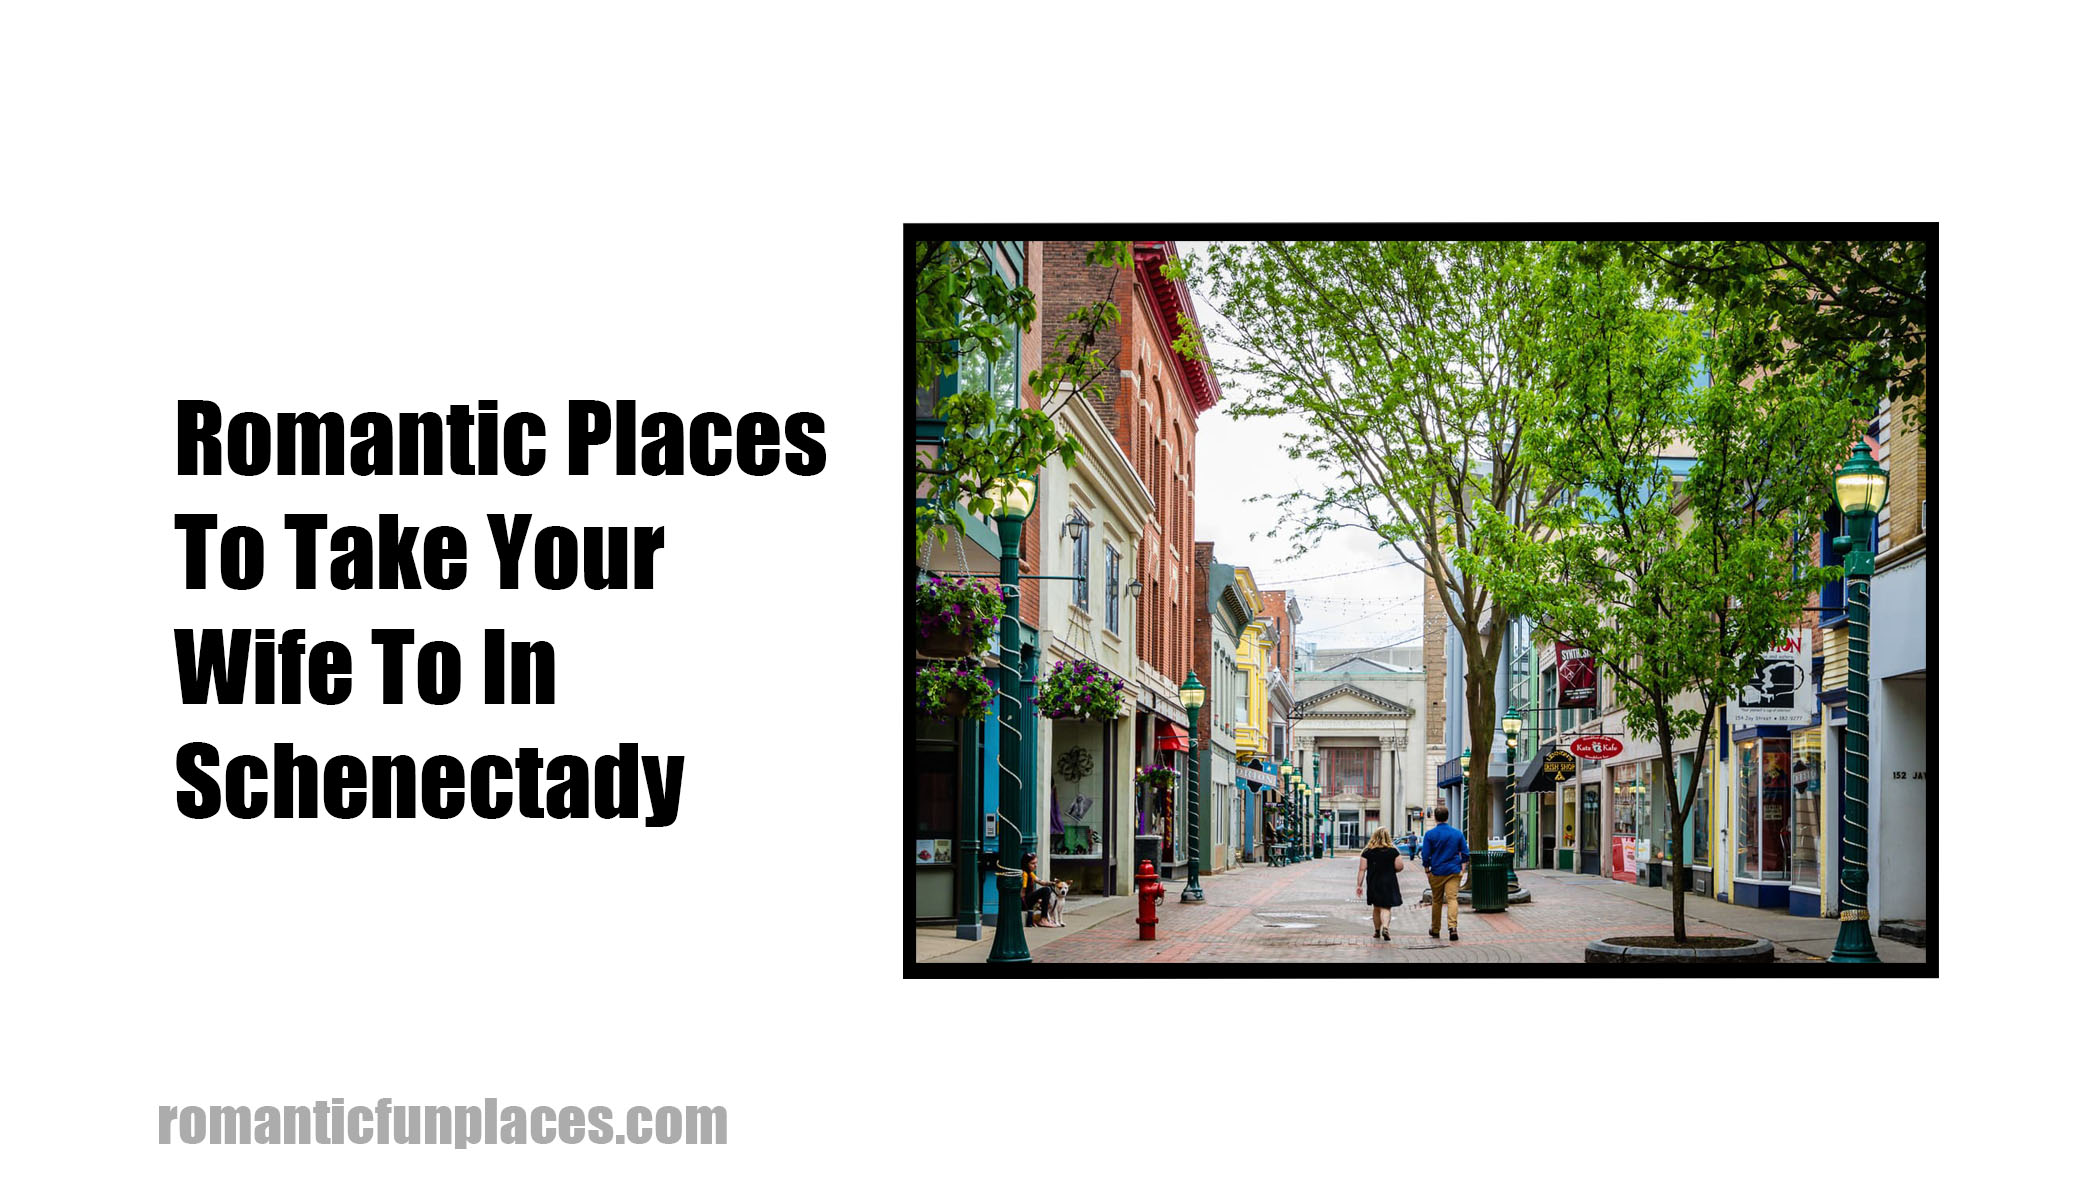 Romantic Places To Take Your Wife To In Schenectady